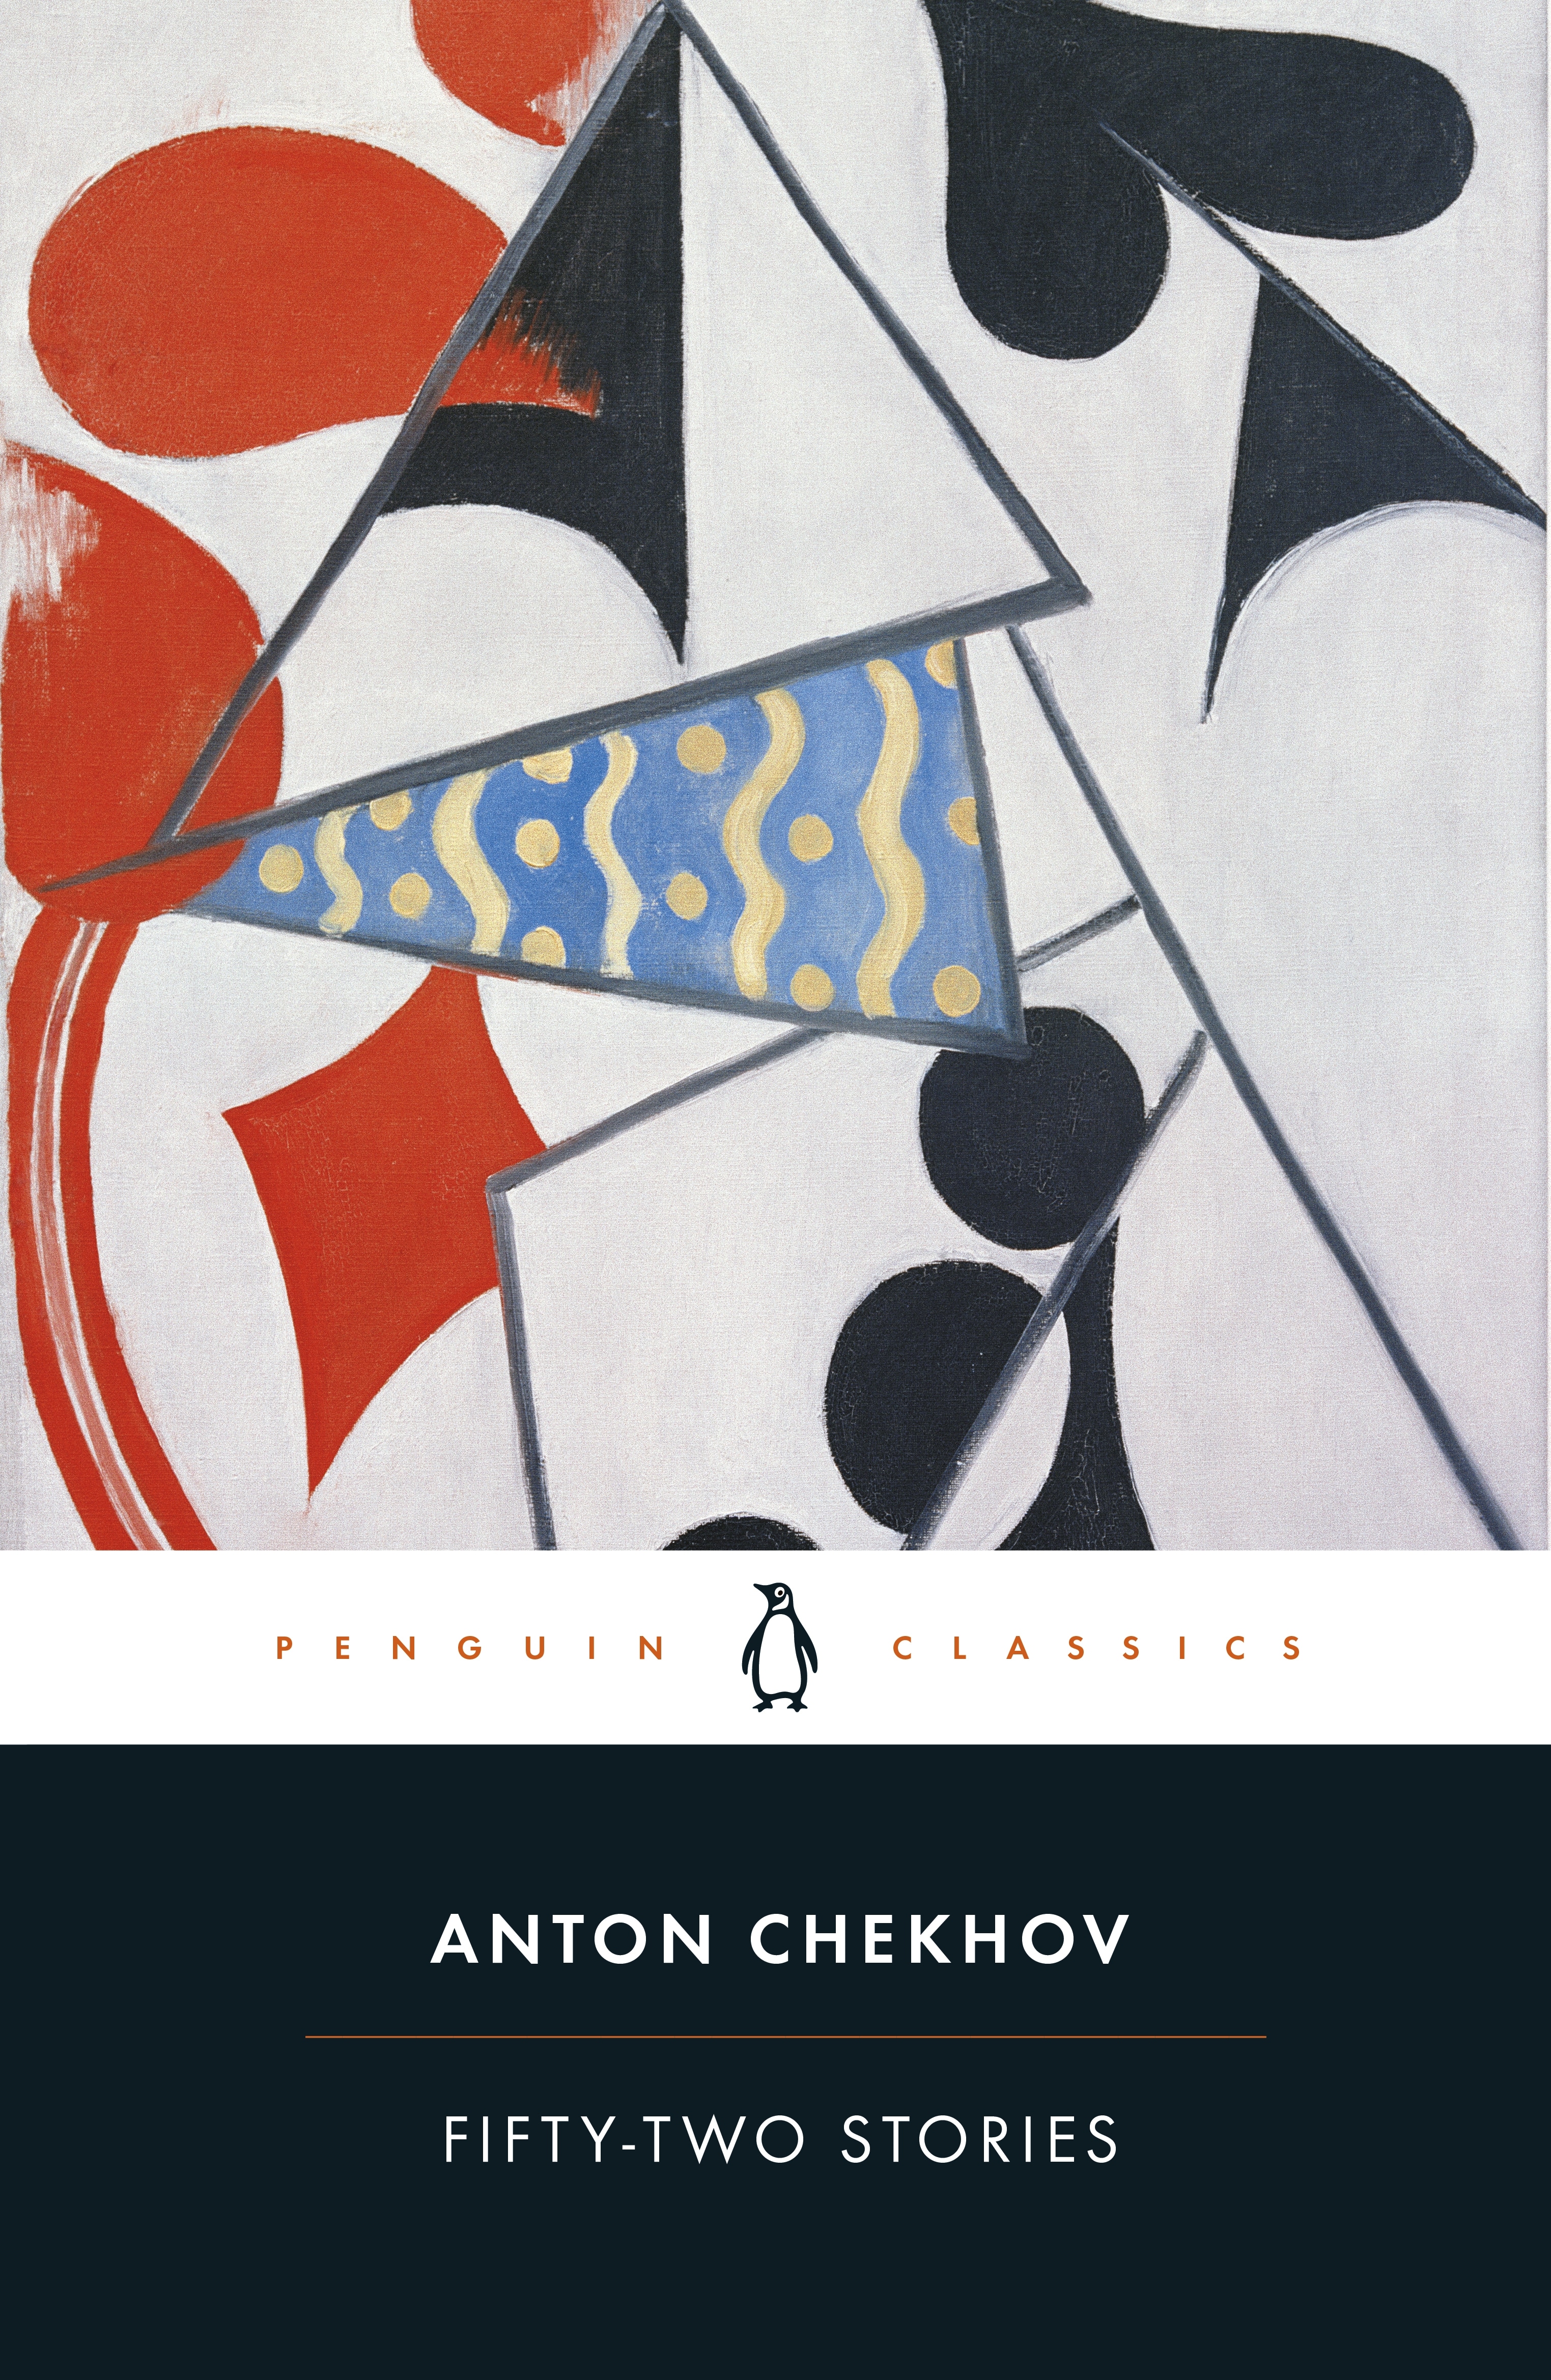 Book “Fifty-Two Stories” by Anton Chekhov — July 1, 2021